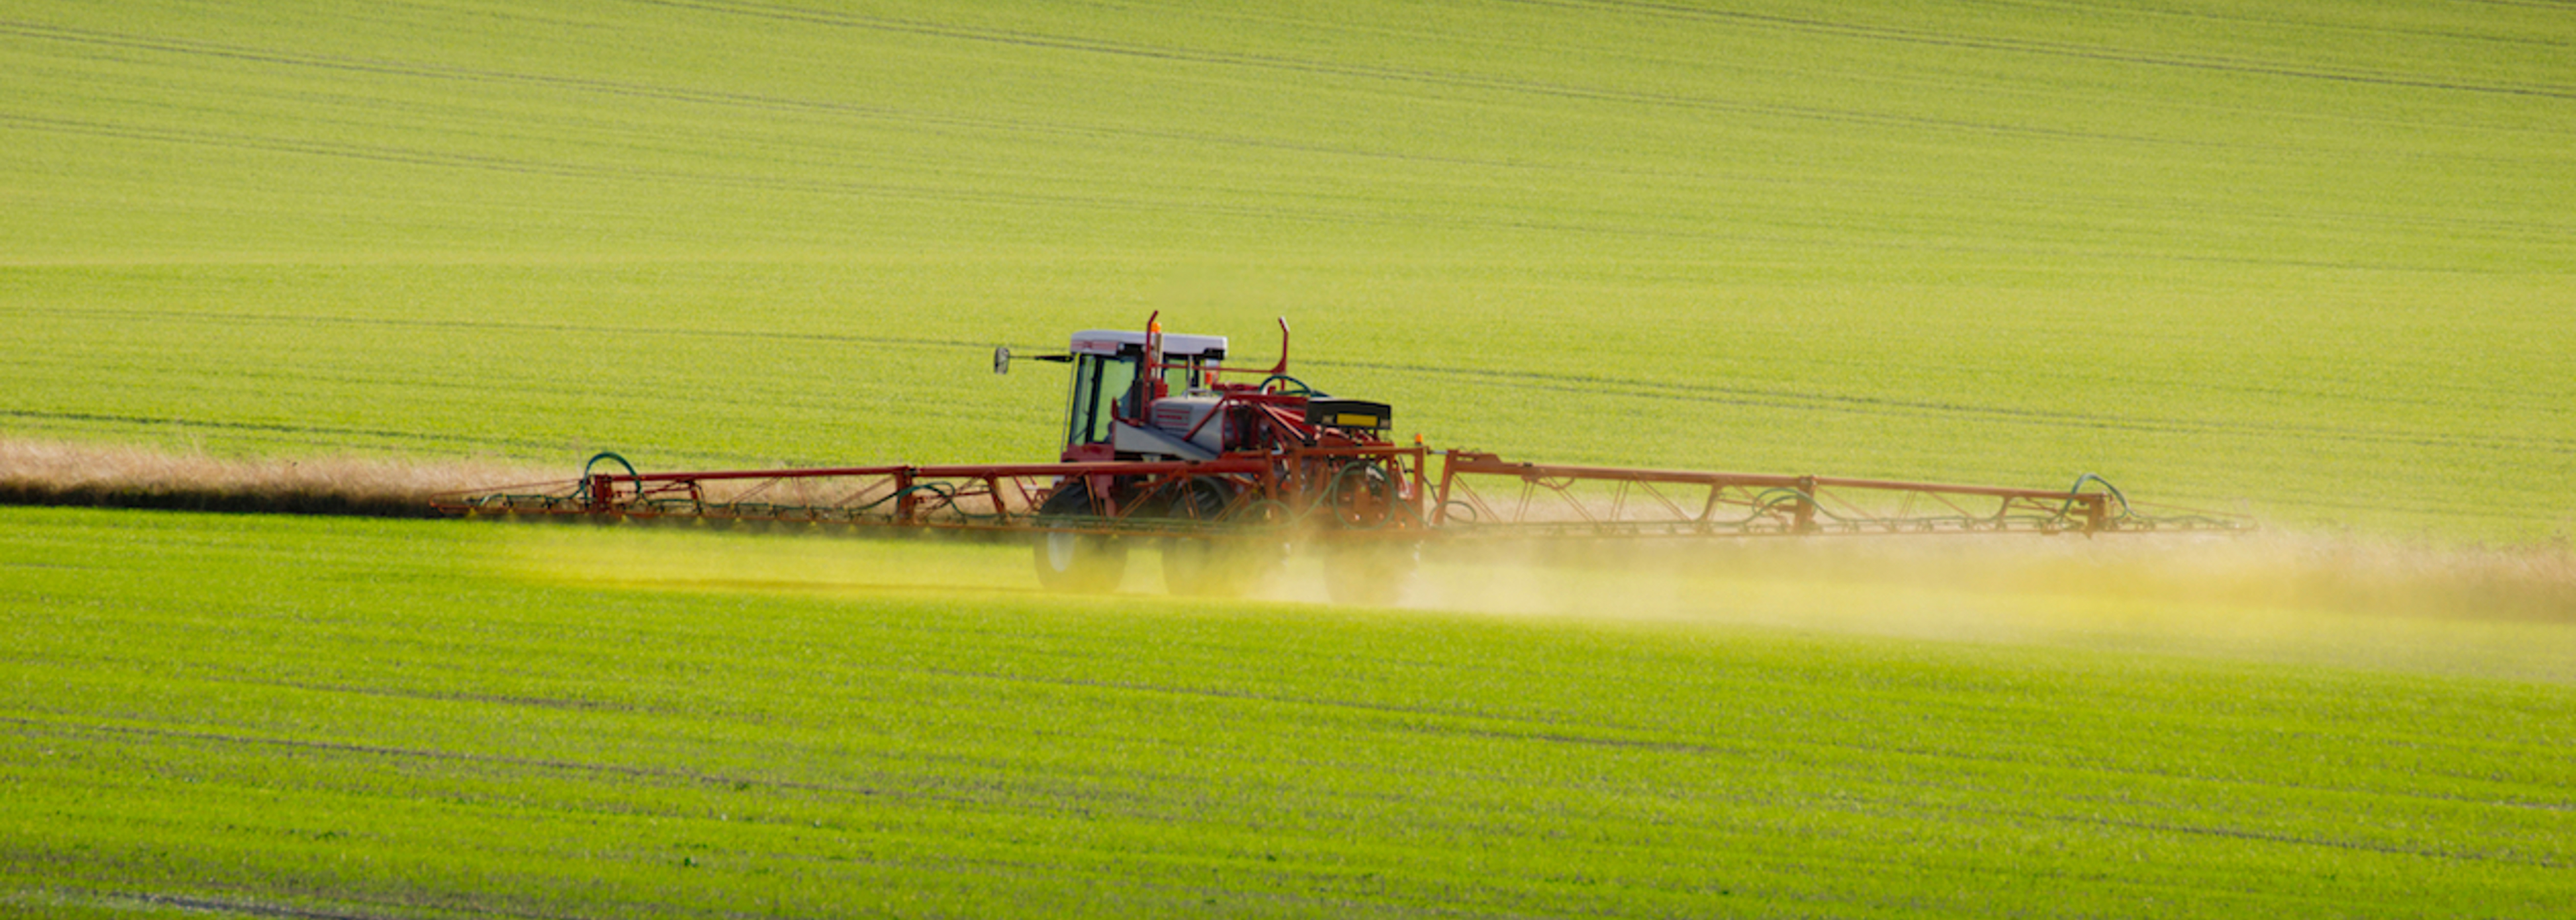 New coalition calls time on crop pesticides